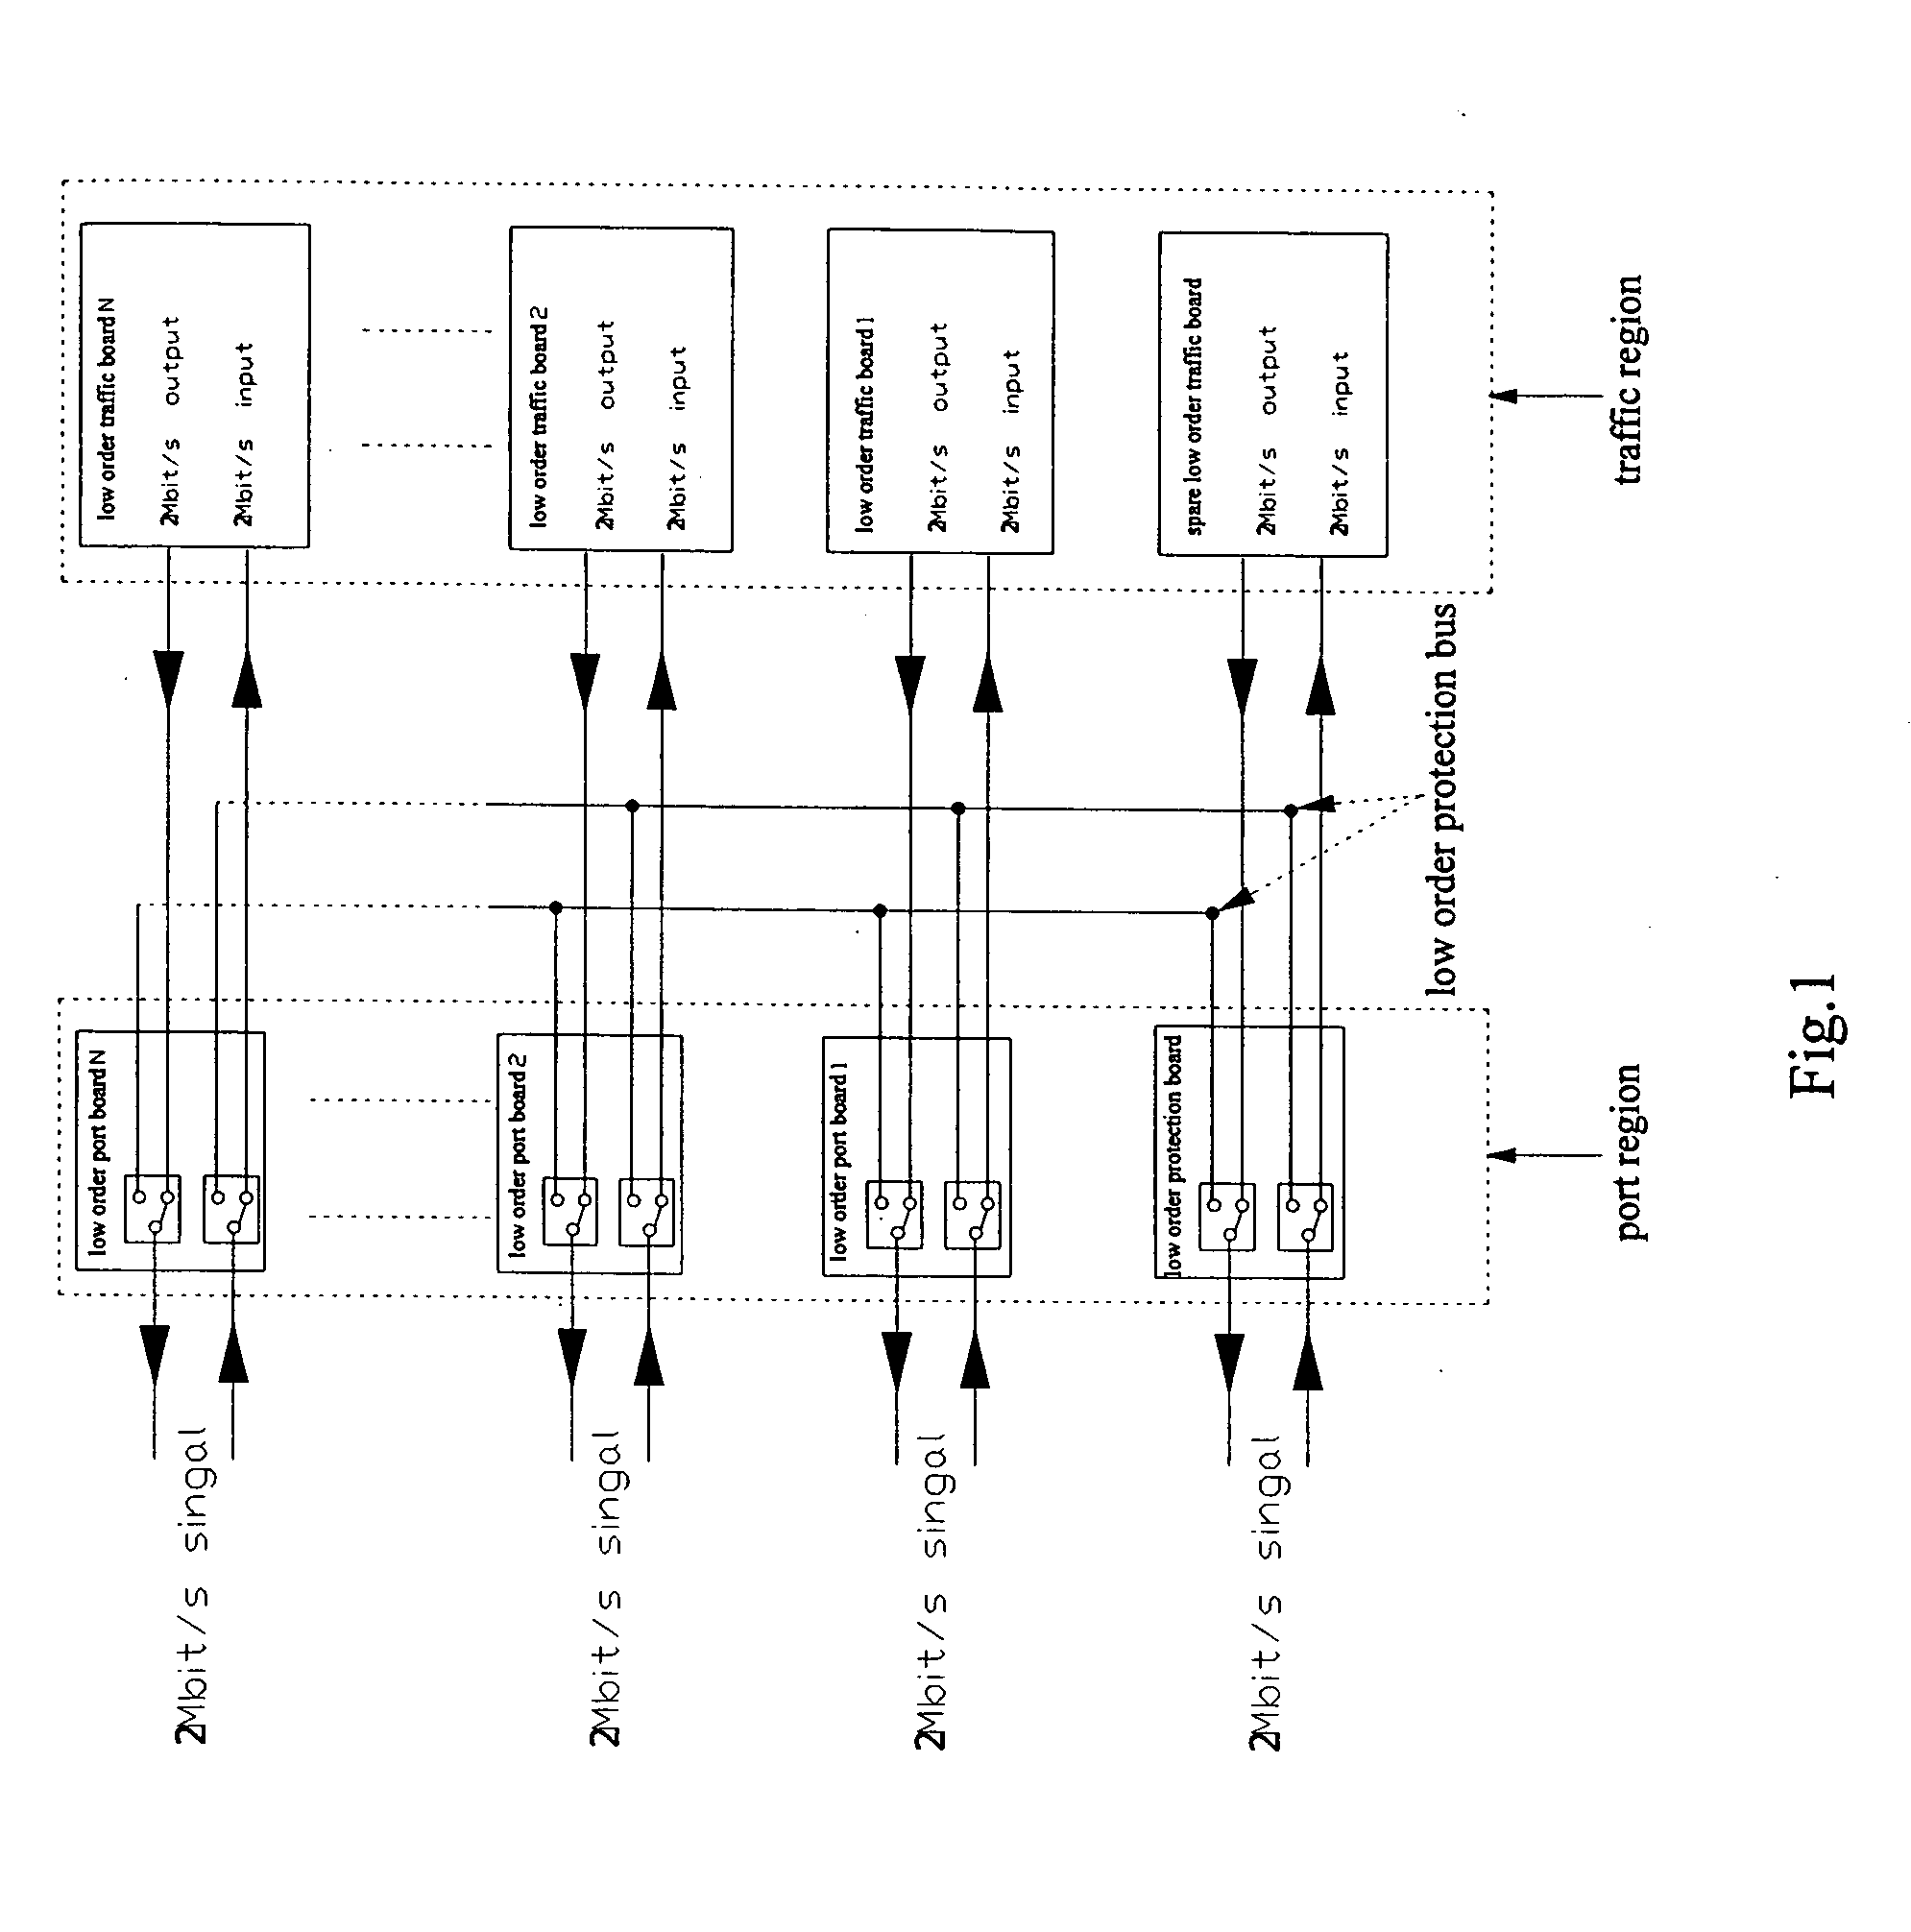 Apparatus for protecting low/high order traffic boards in a synchronous digital hierarchy transmission device